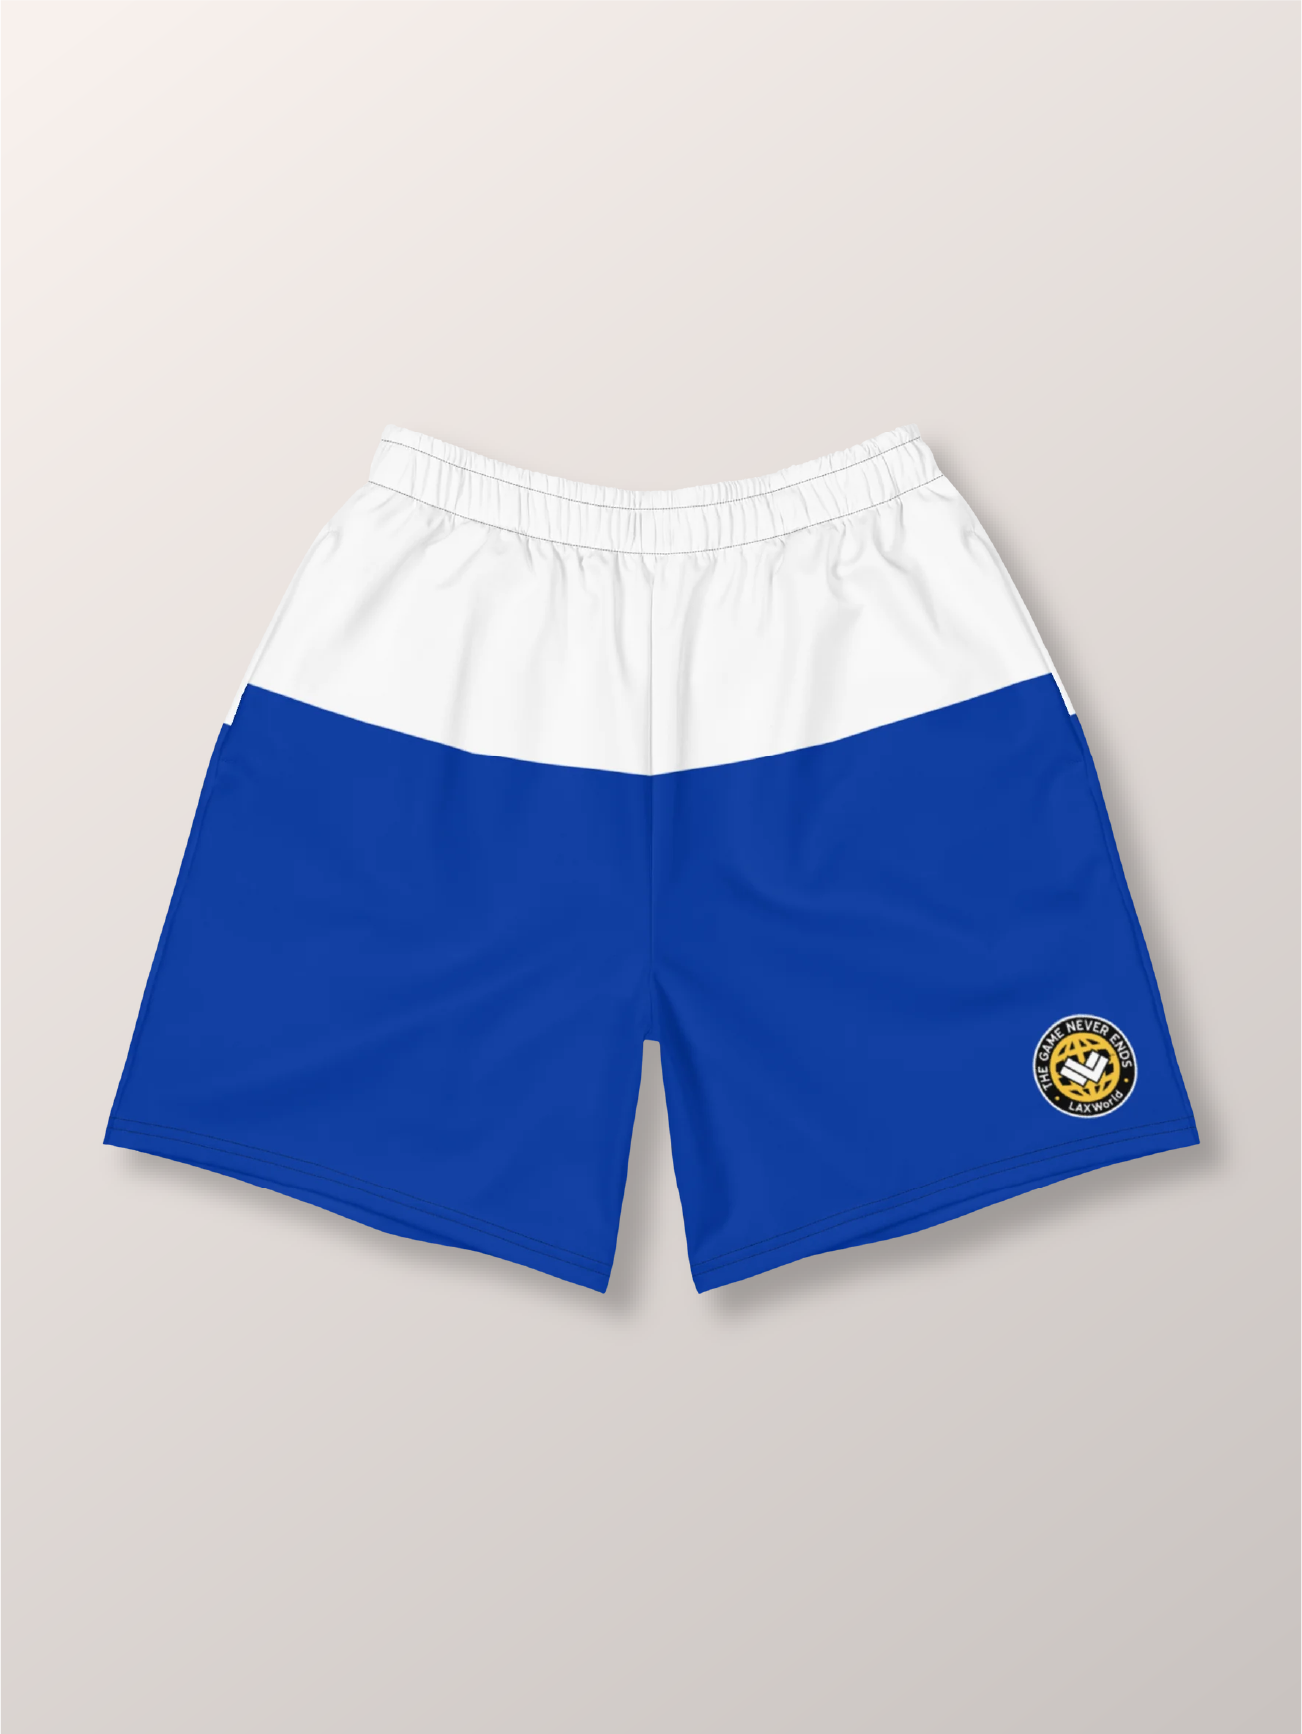 Premium Creator’s White/Blue Athletic Lacrosse Short | Blue and White | Man - Off Field